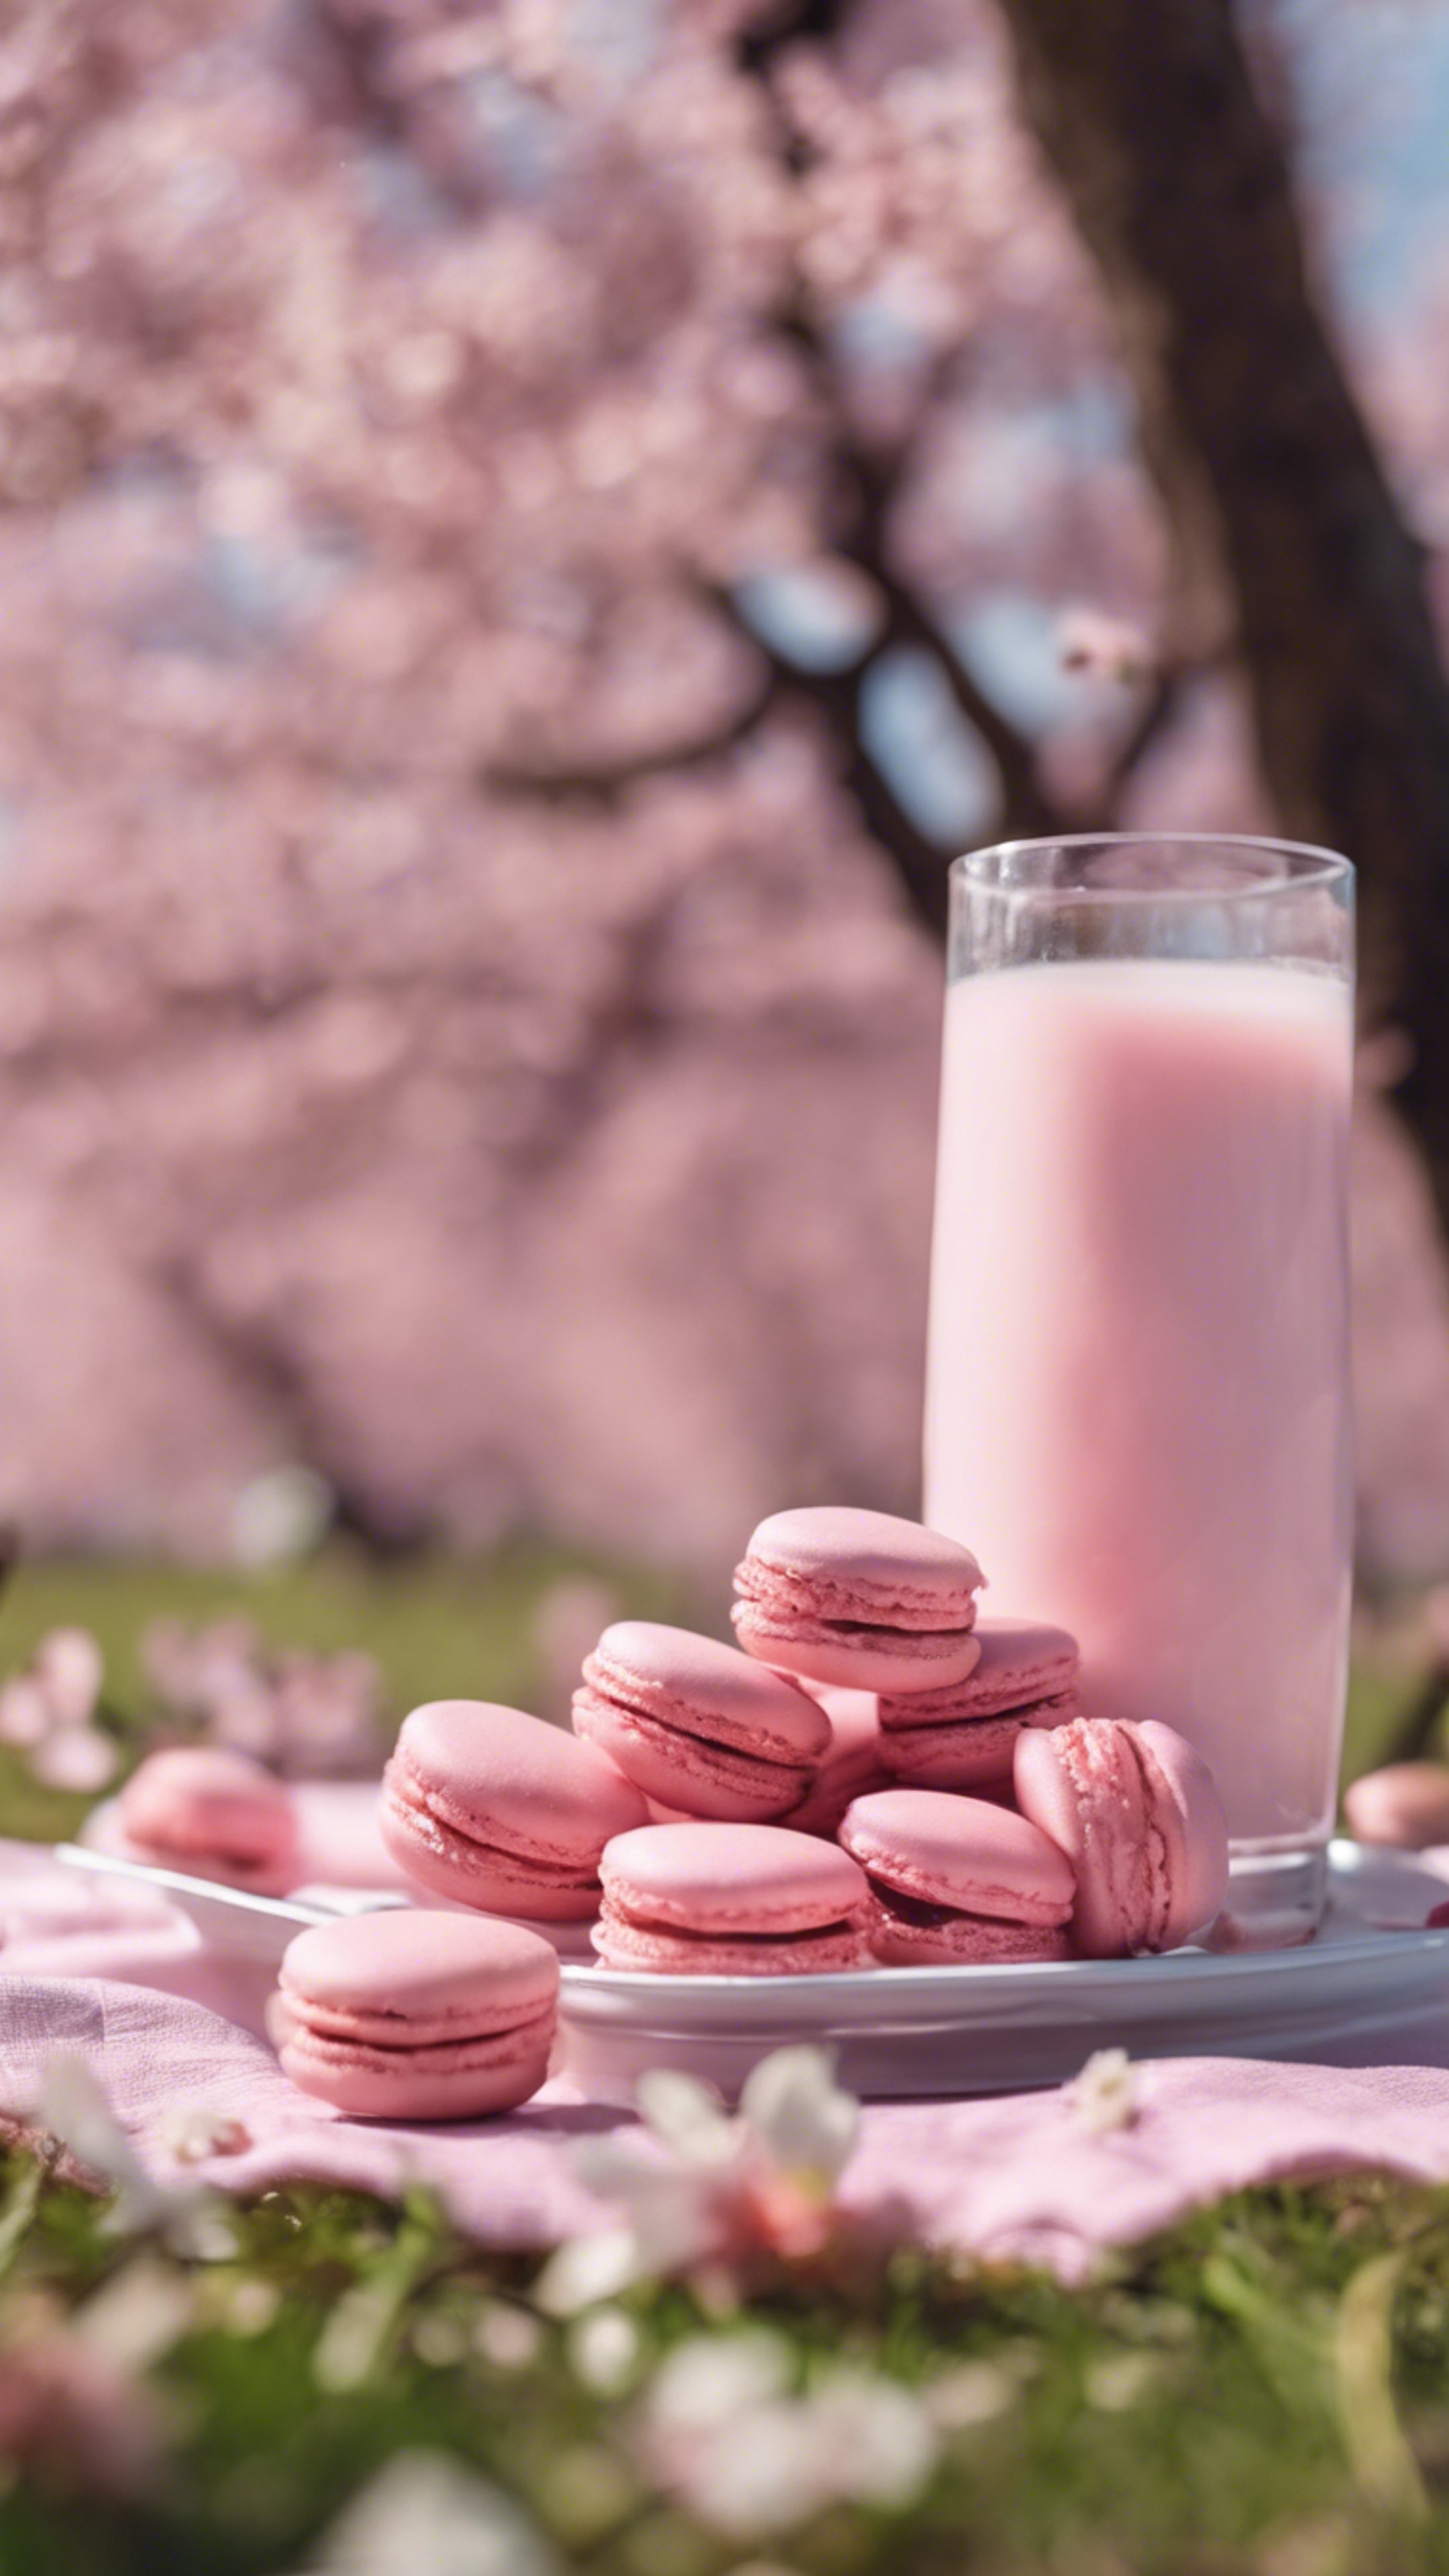 A picnic under the cherry blossoms with pink macaroons and strawberry milk.壁紙[97540e72ef6b46bcbaa8]